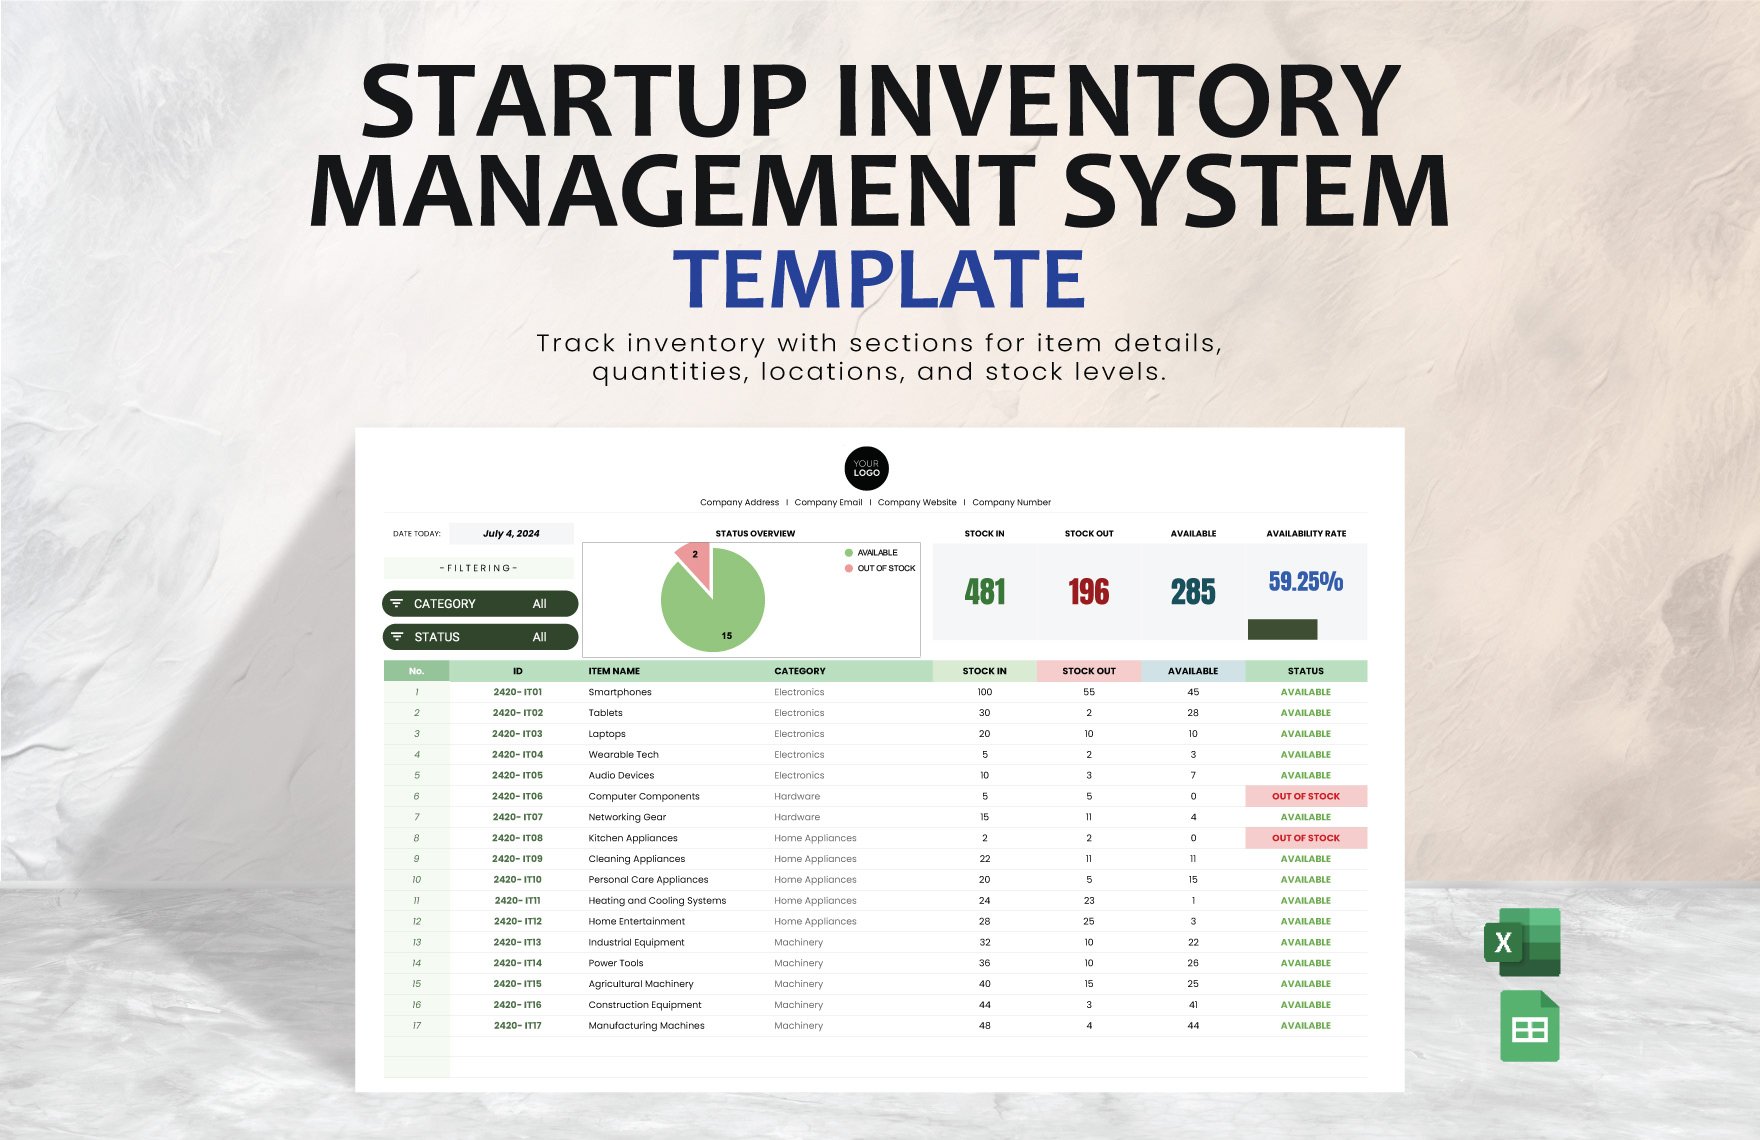 Startup Inventory Management System Template in Excel, Google Sheets